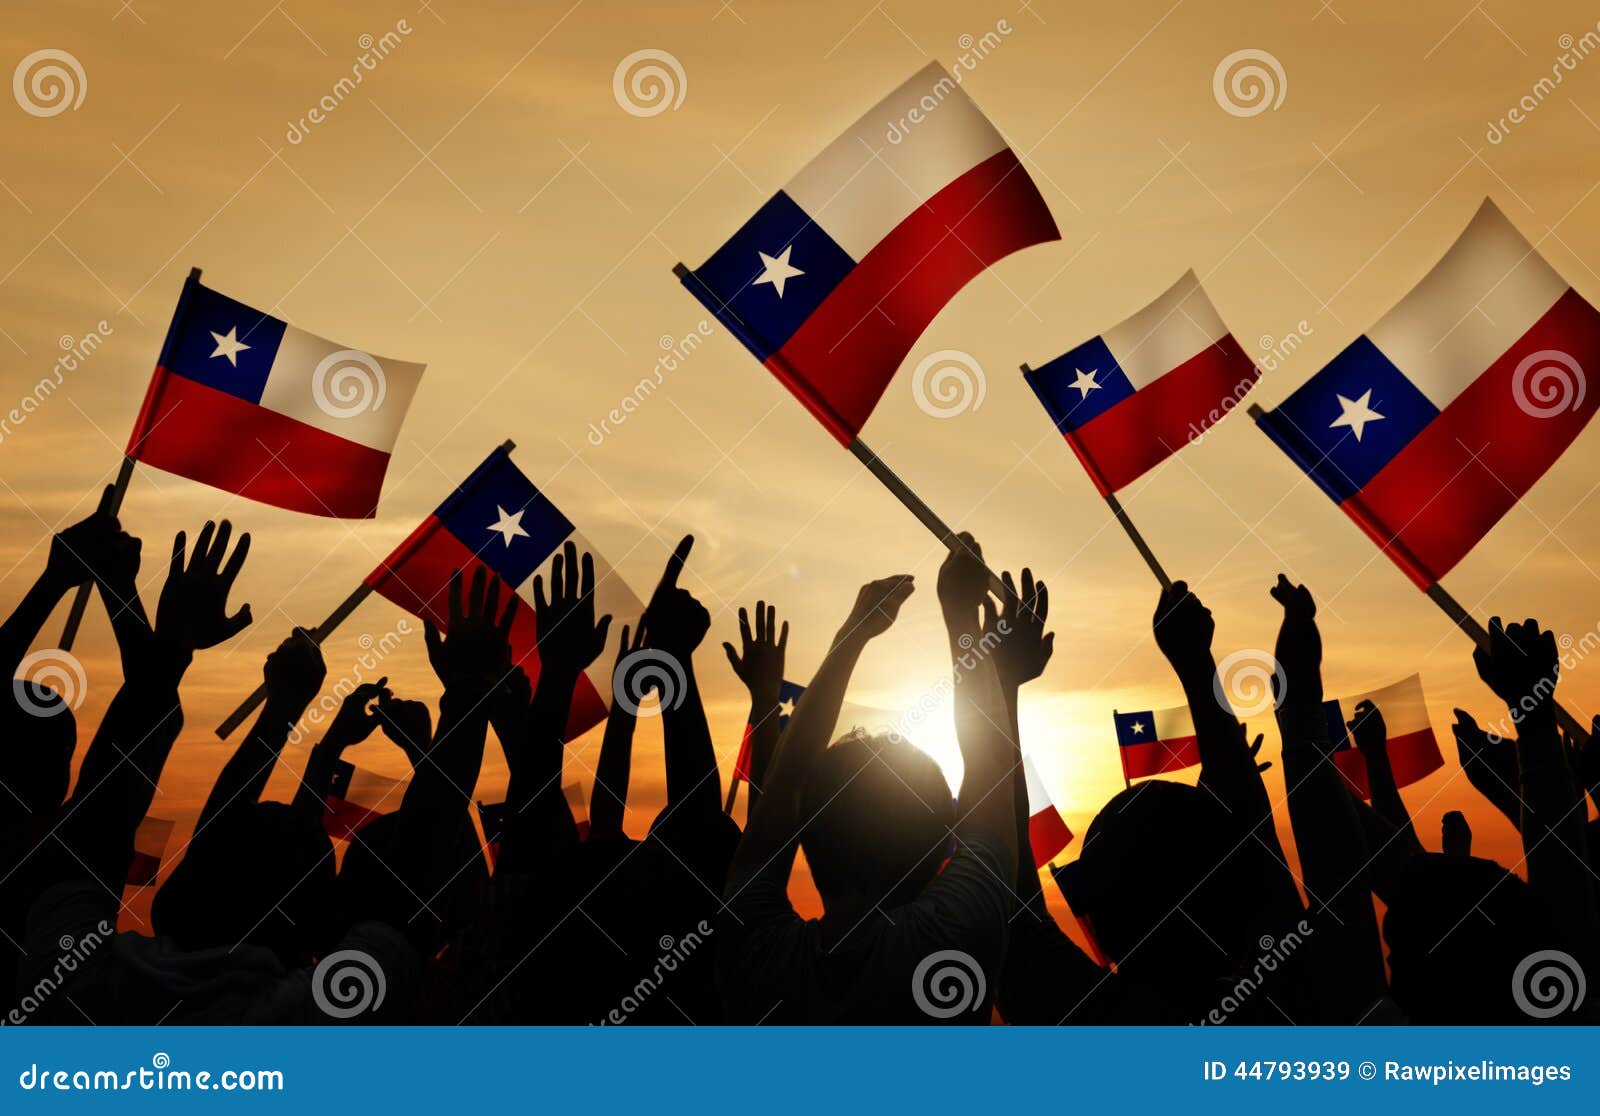 silhouettes of people holding flag of chile